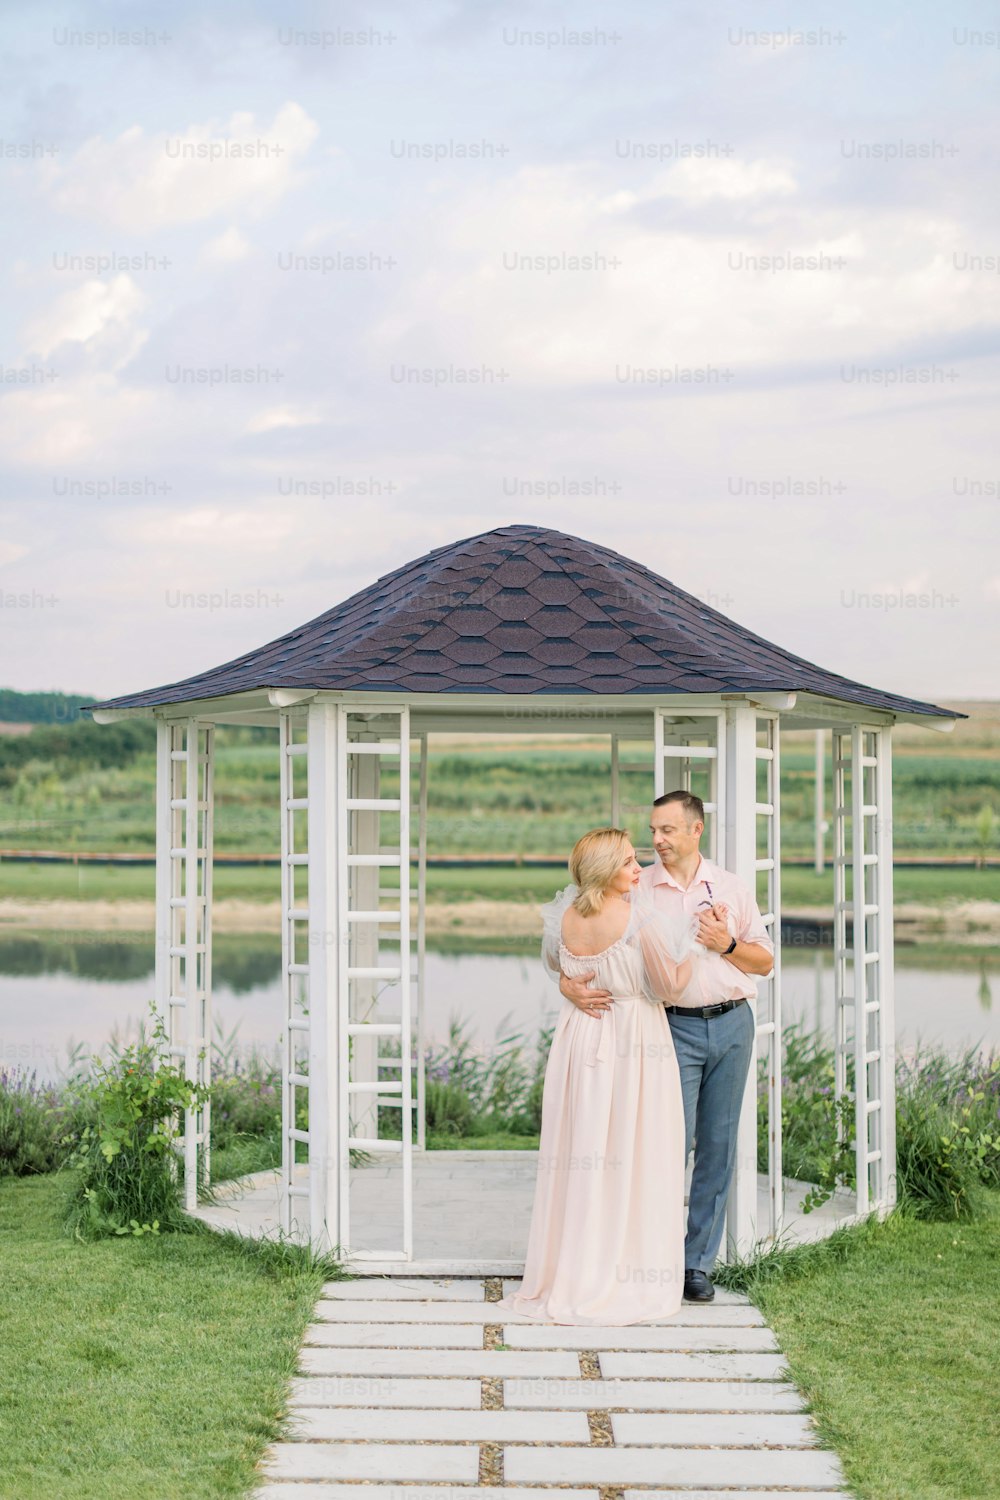 Romantic date on the shore of the pond. Happy mature couple, man and woman in elegant clothes, standing near wooden gazebo on the shore of beautiful lake